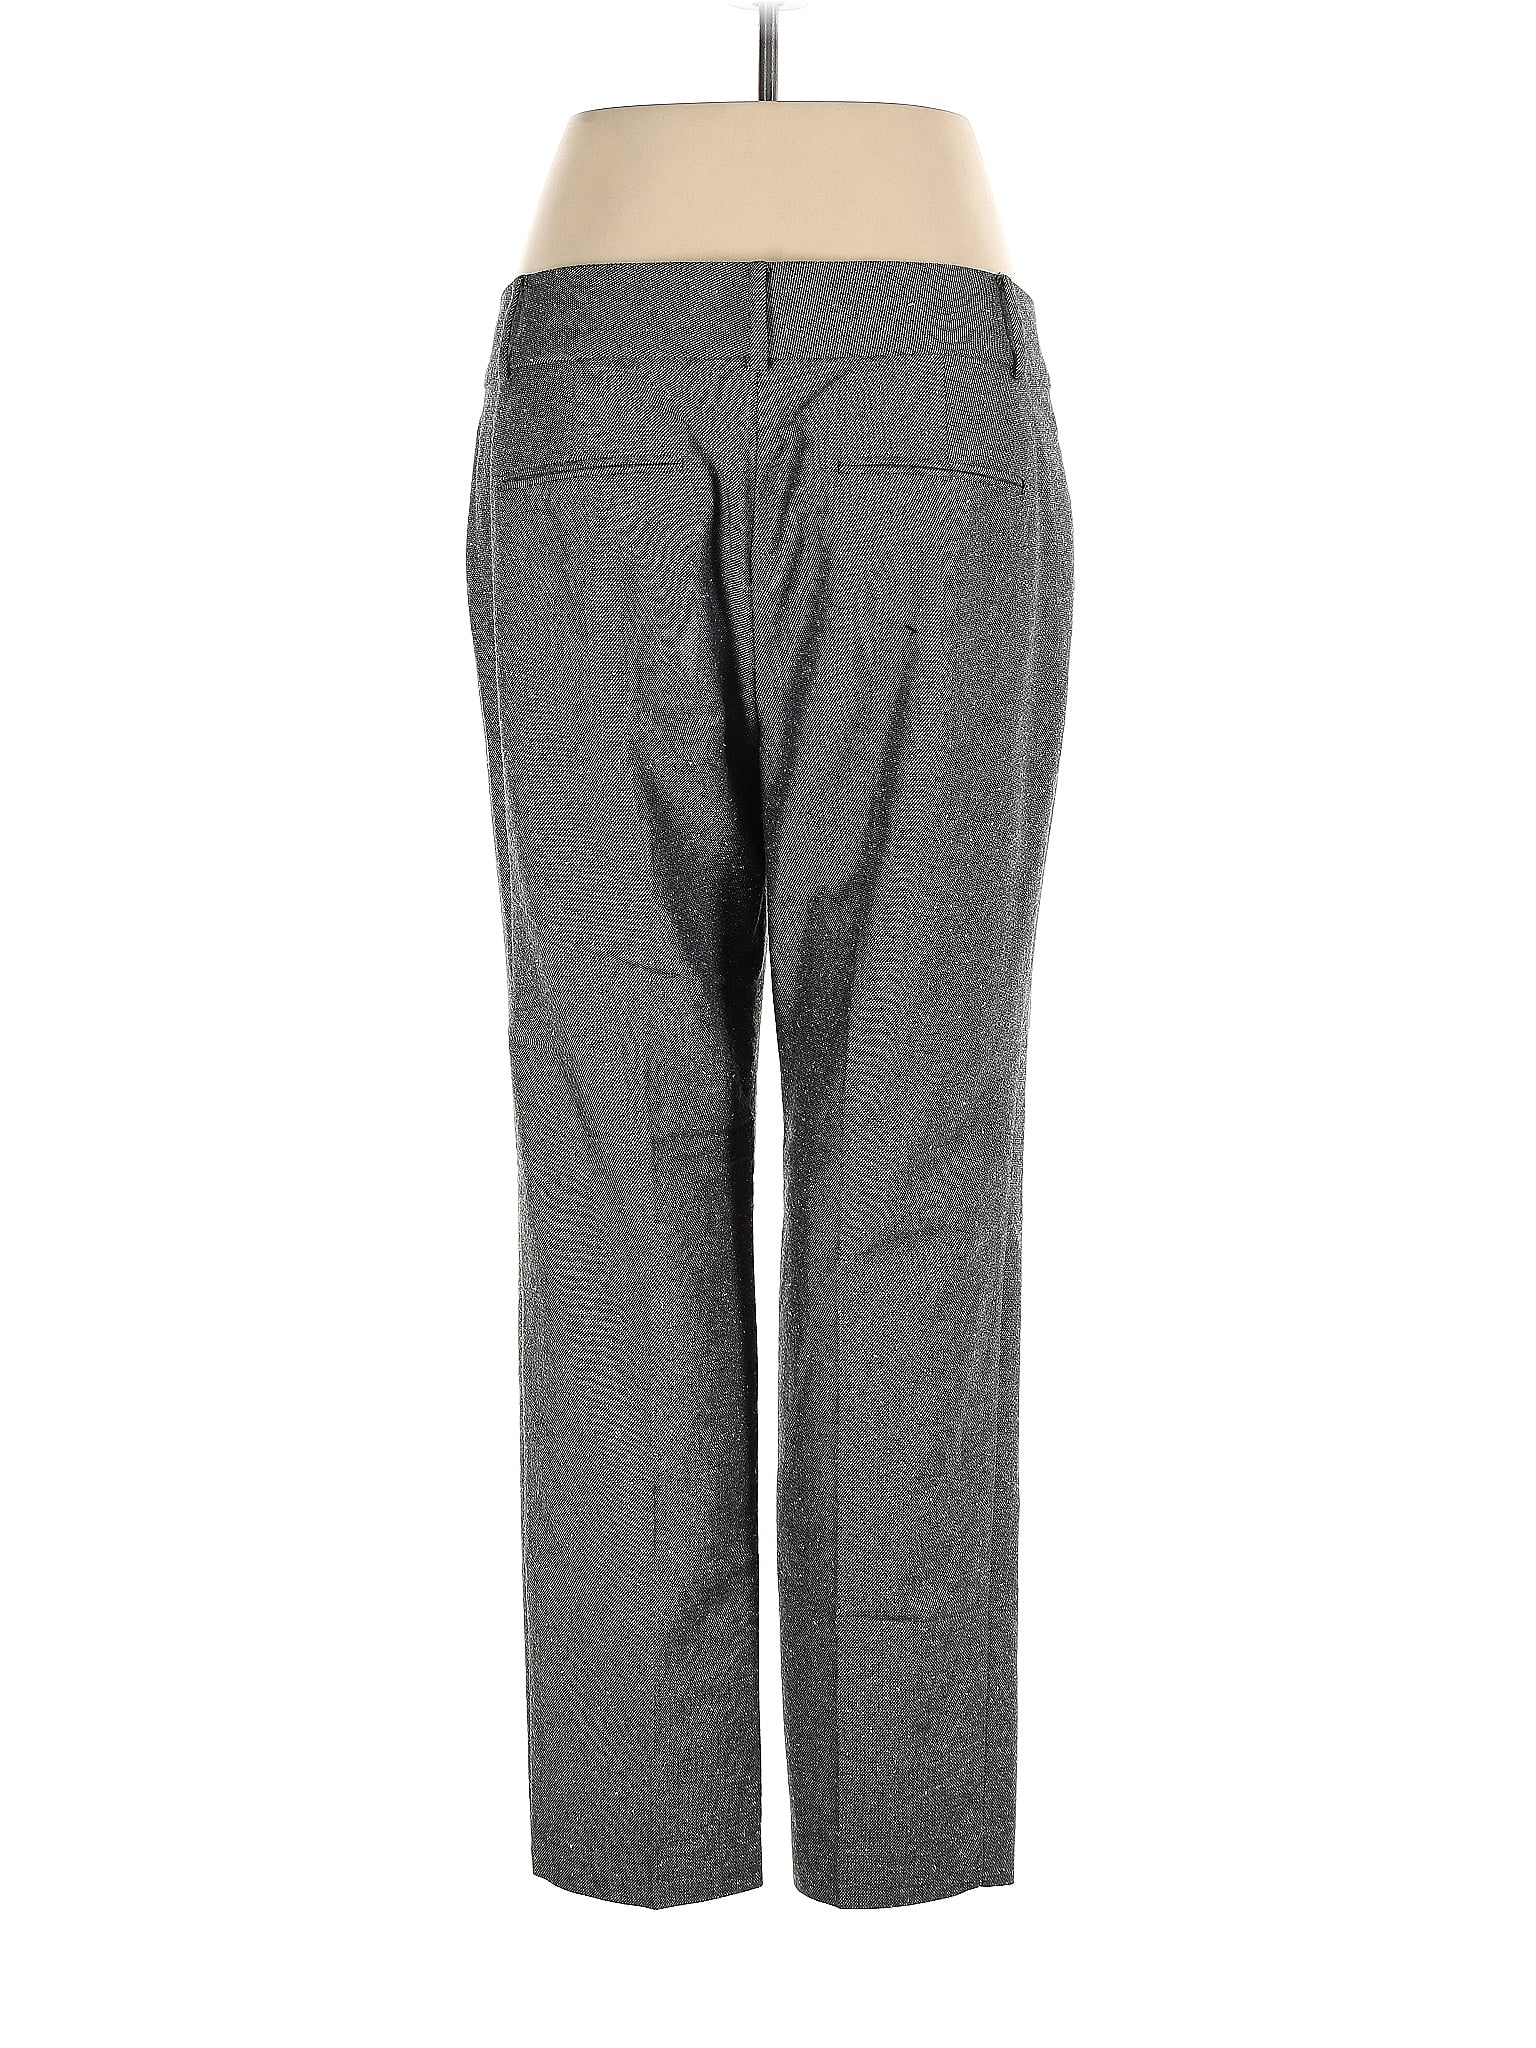 Ann Taylor Multi Color Gray Casual Pants Size 14 (Tall) - 71% off